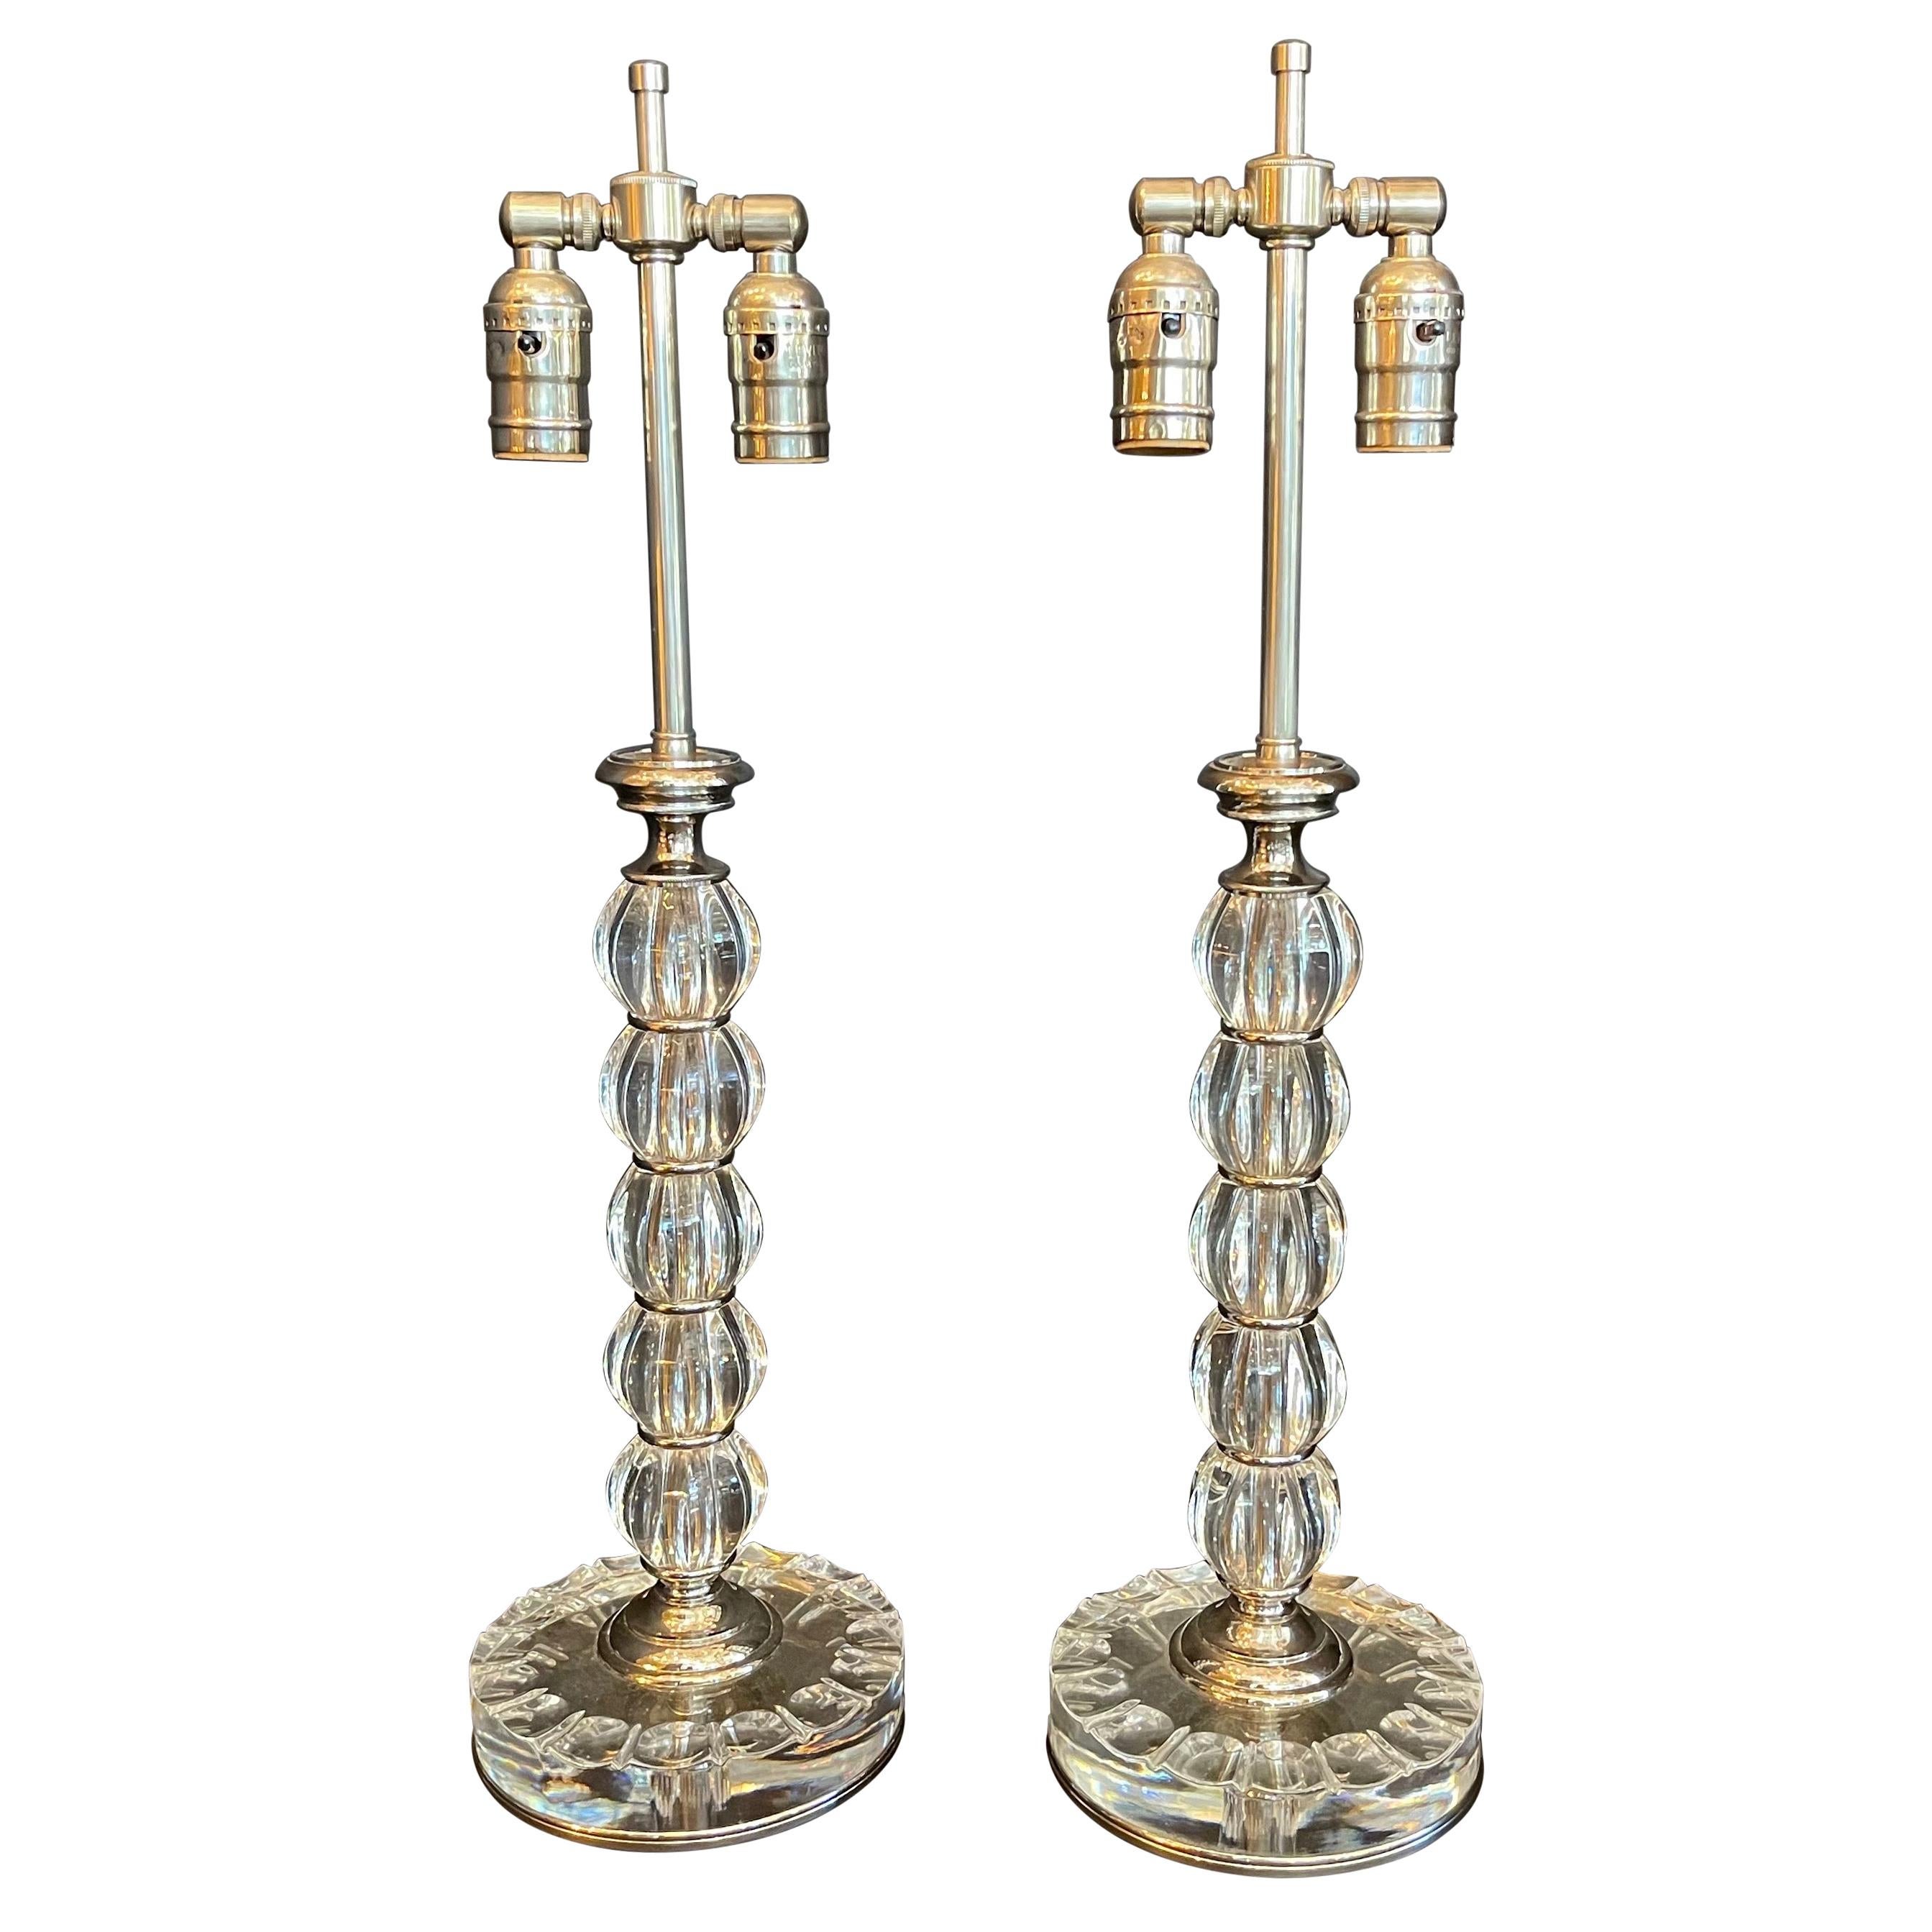 Wonderful Mid-Century Modern Crystal Polished Nickel Chrome Pair Baccarat Lamps For Sale